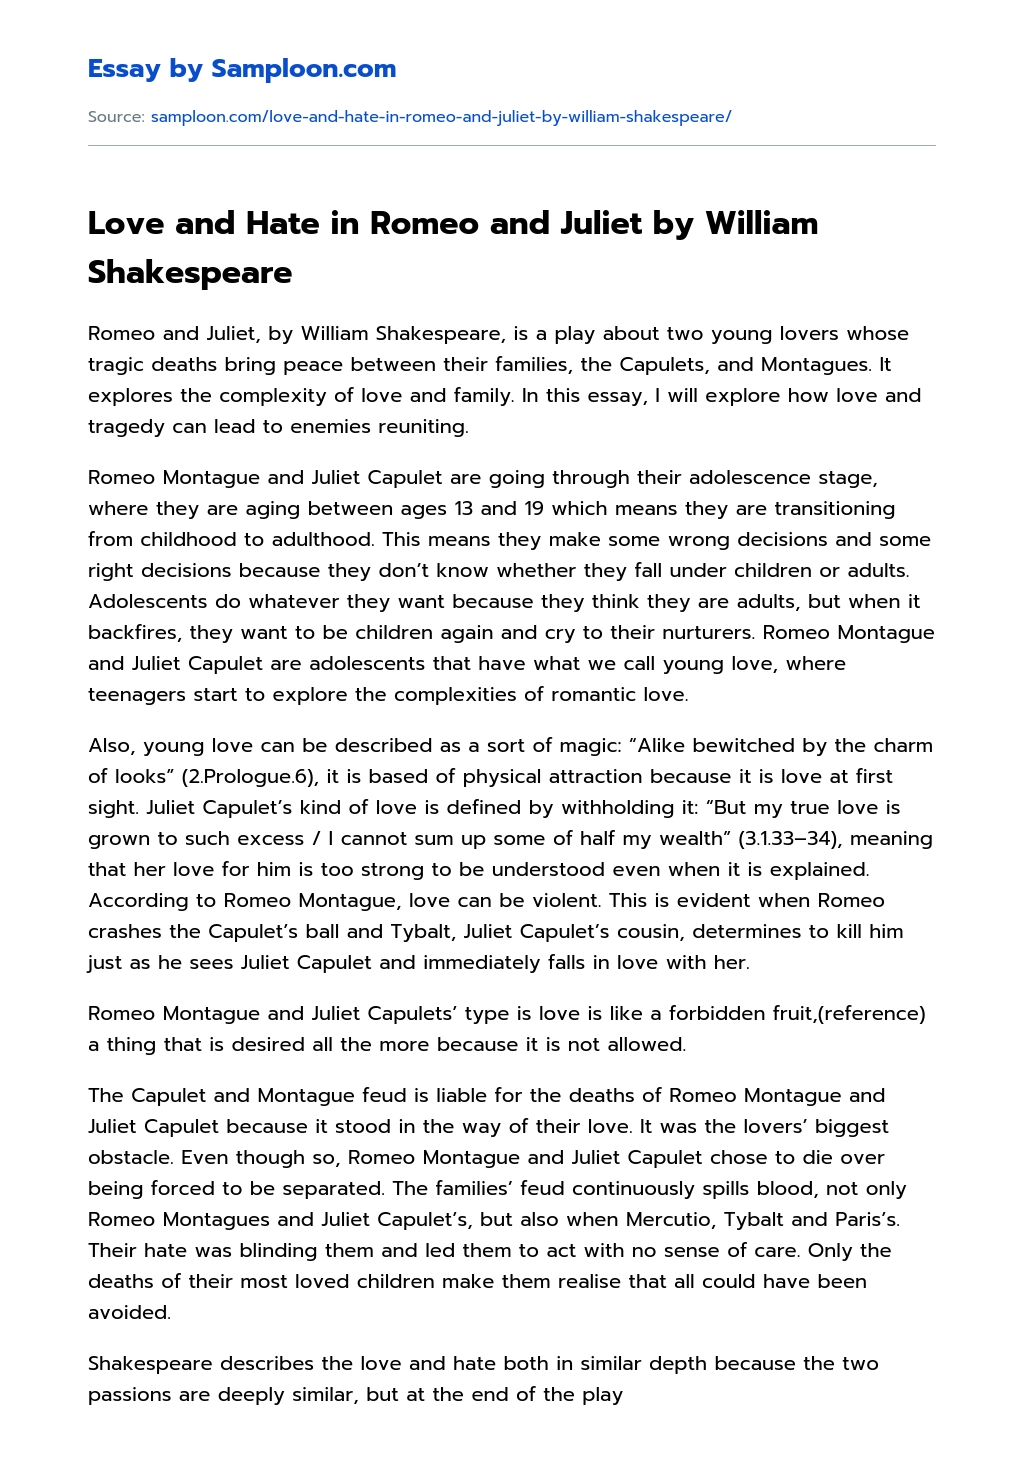 Love and Hate in Romeo and Juliet by William Shakespeare Argumentative Essay essay